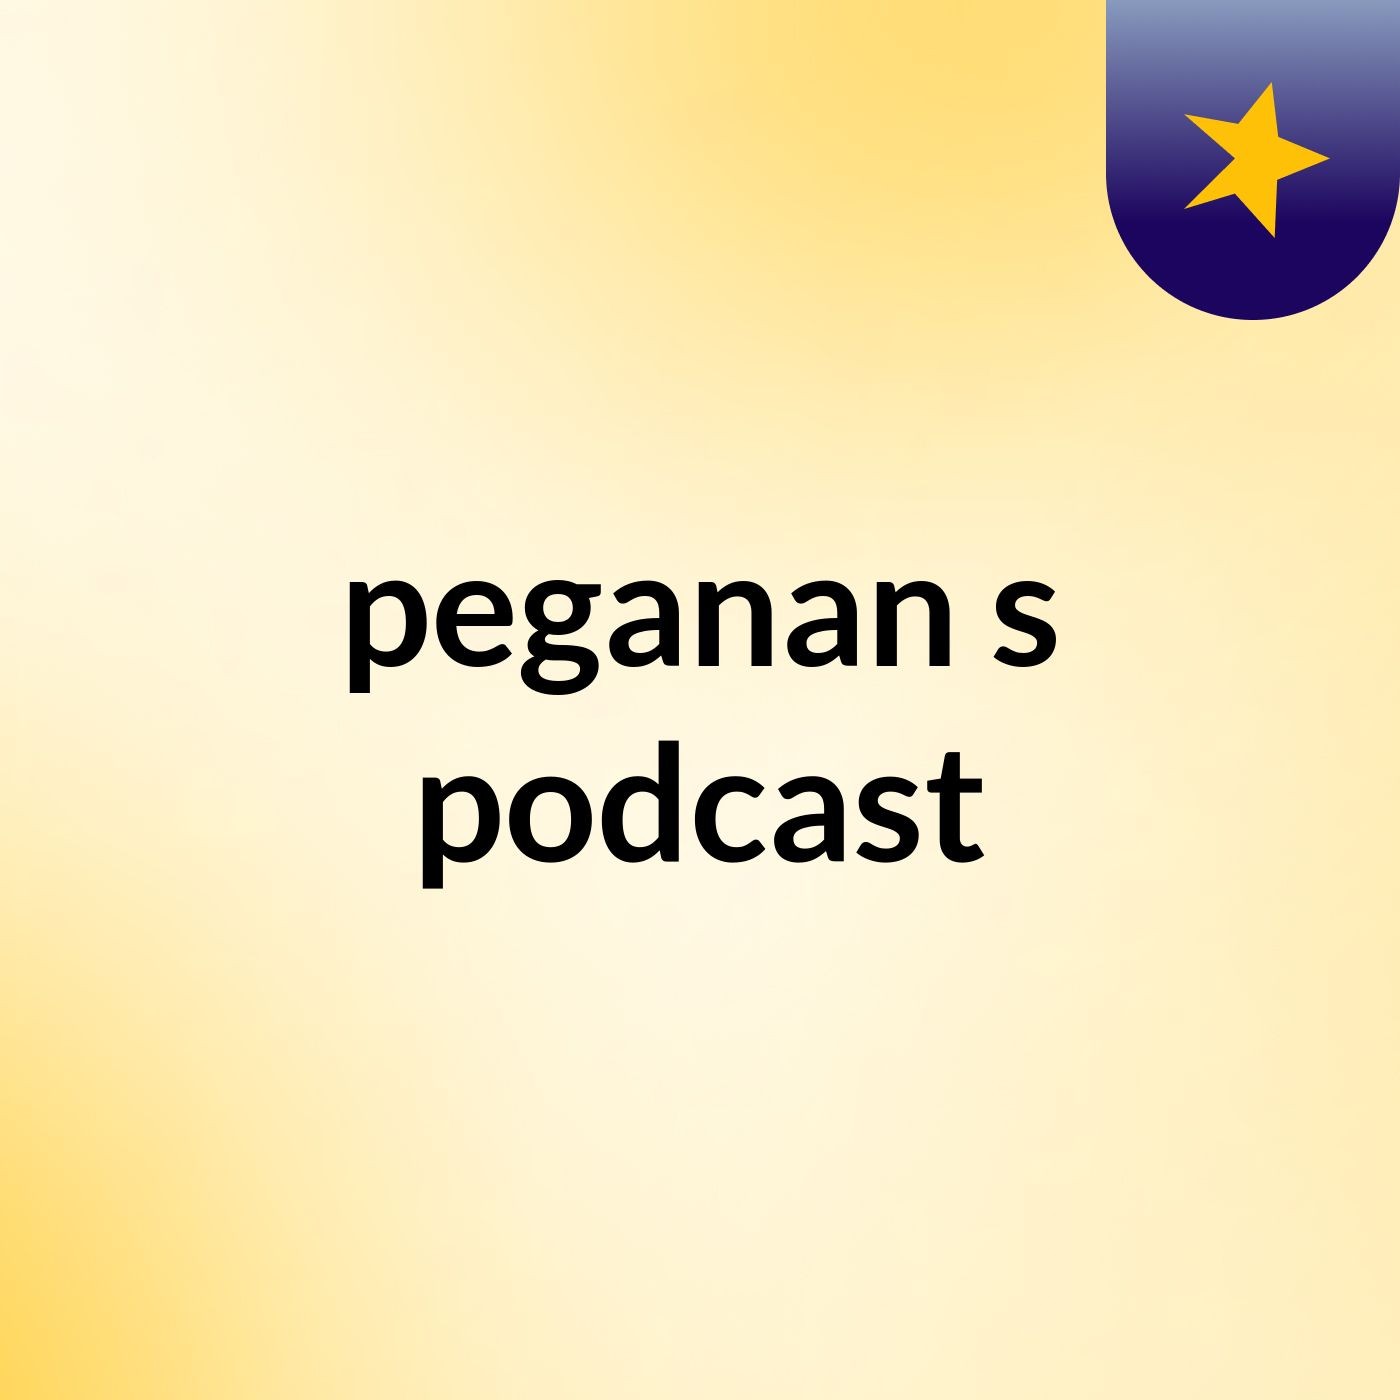 peganan's podcast